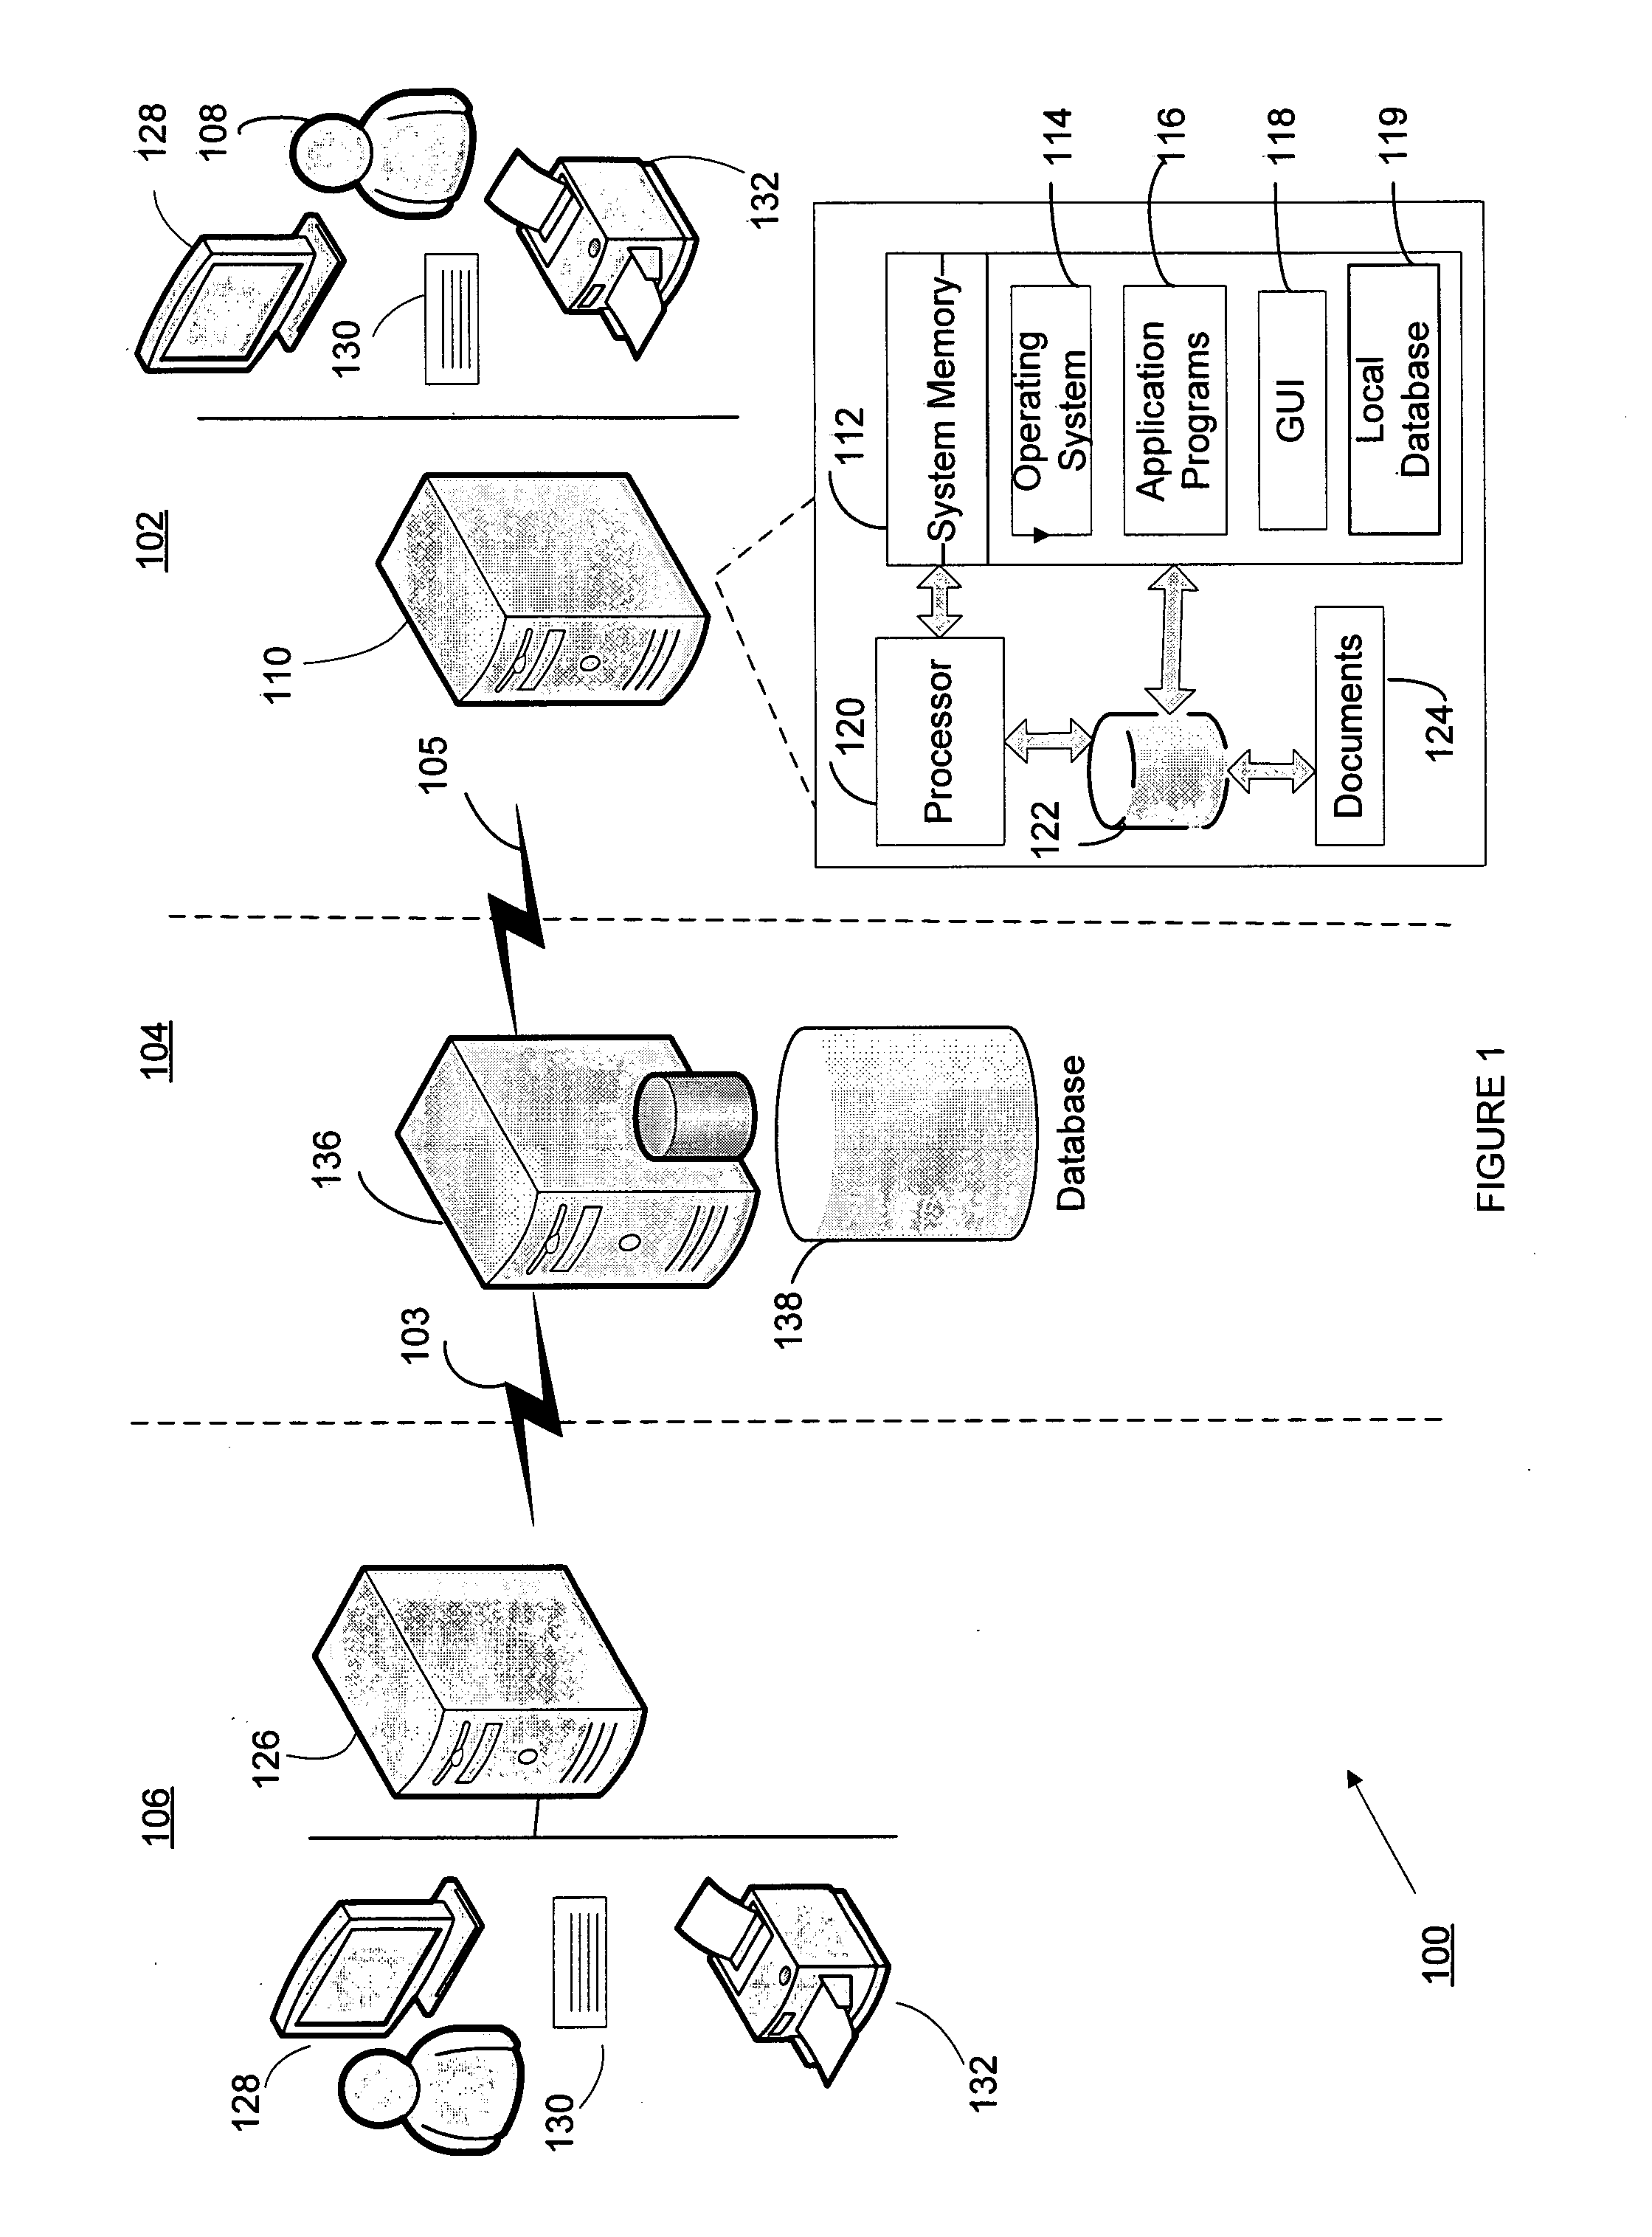 Method and system for determining relevance of terms in text documents